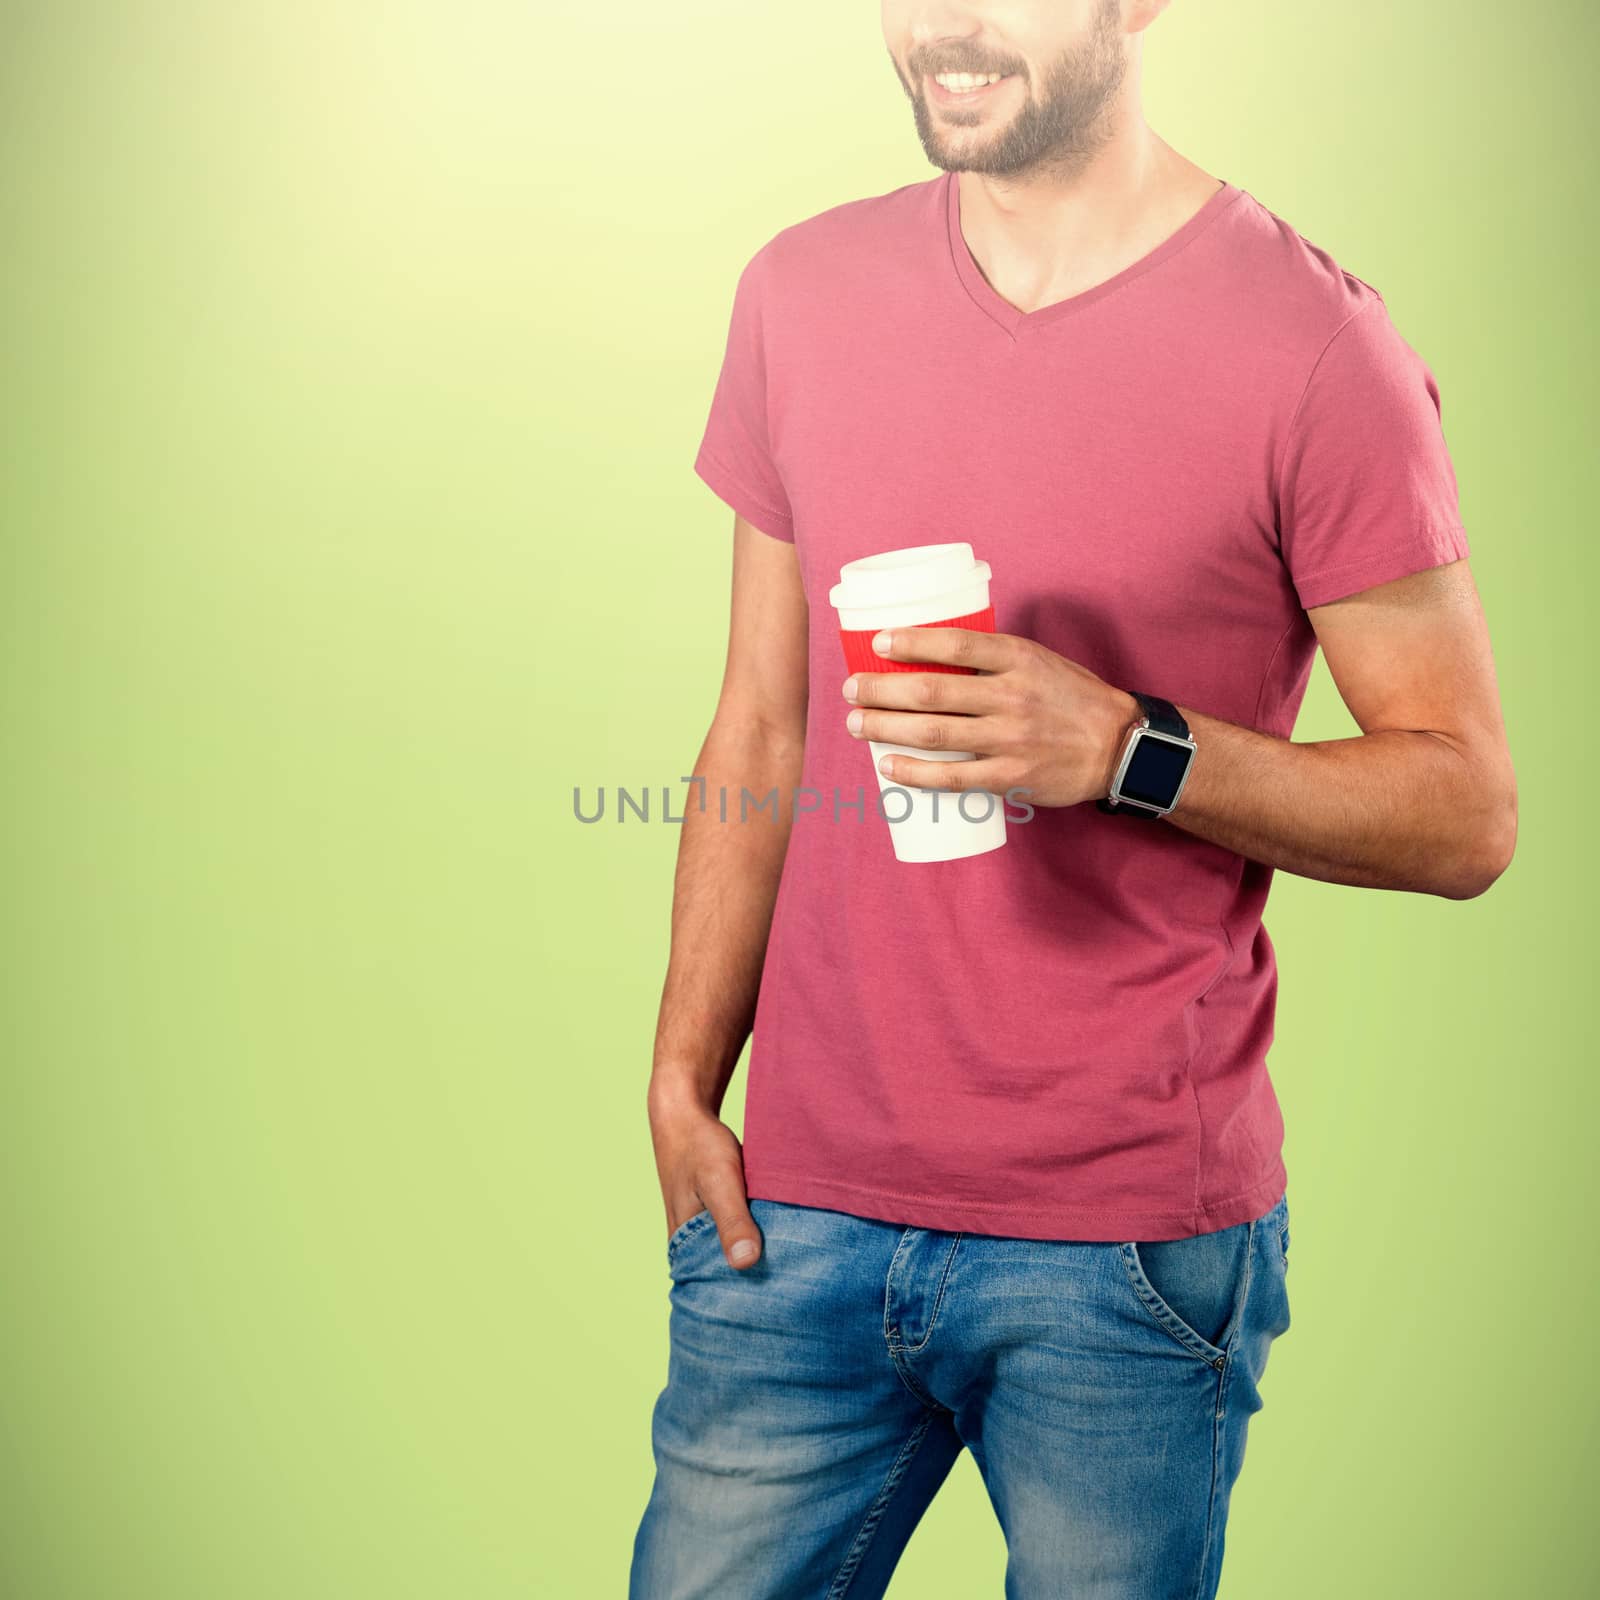 Midsection of smiling model holding disposable coffee cup against green background